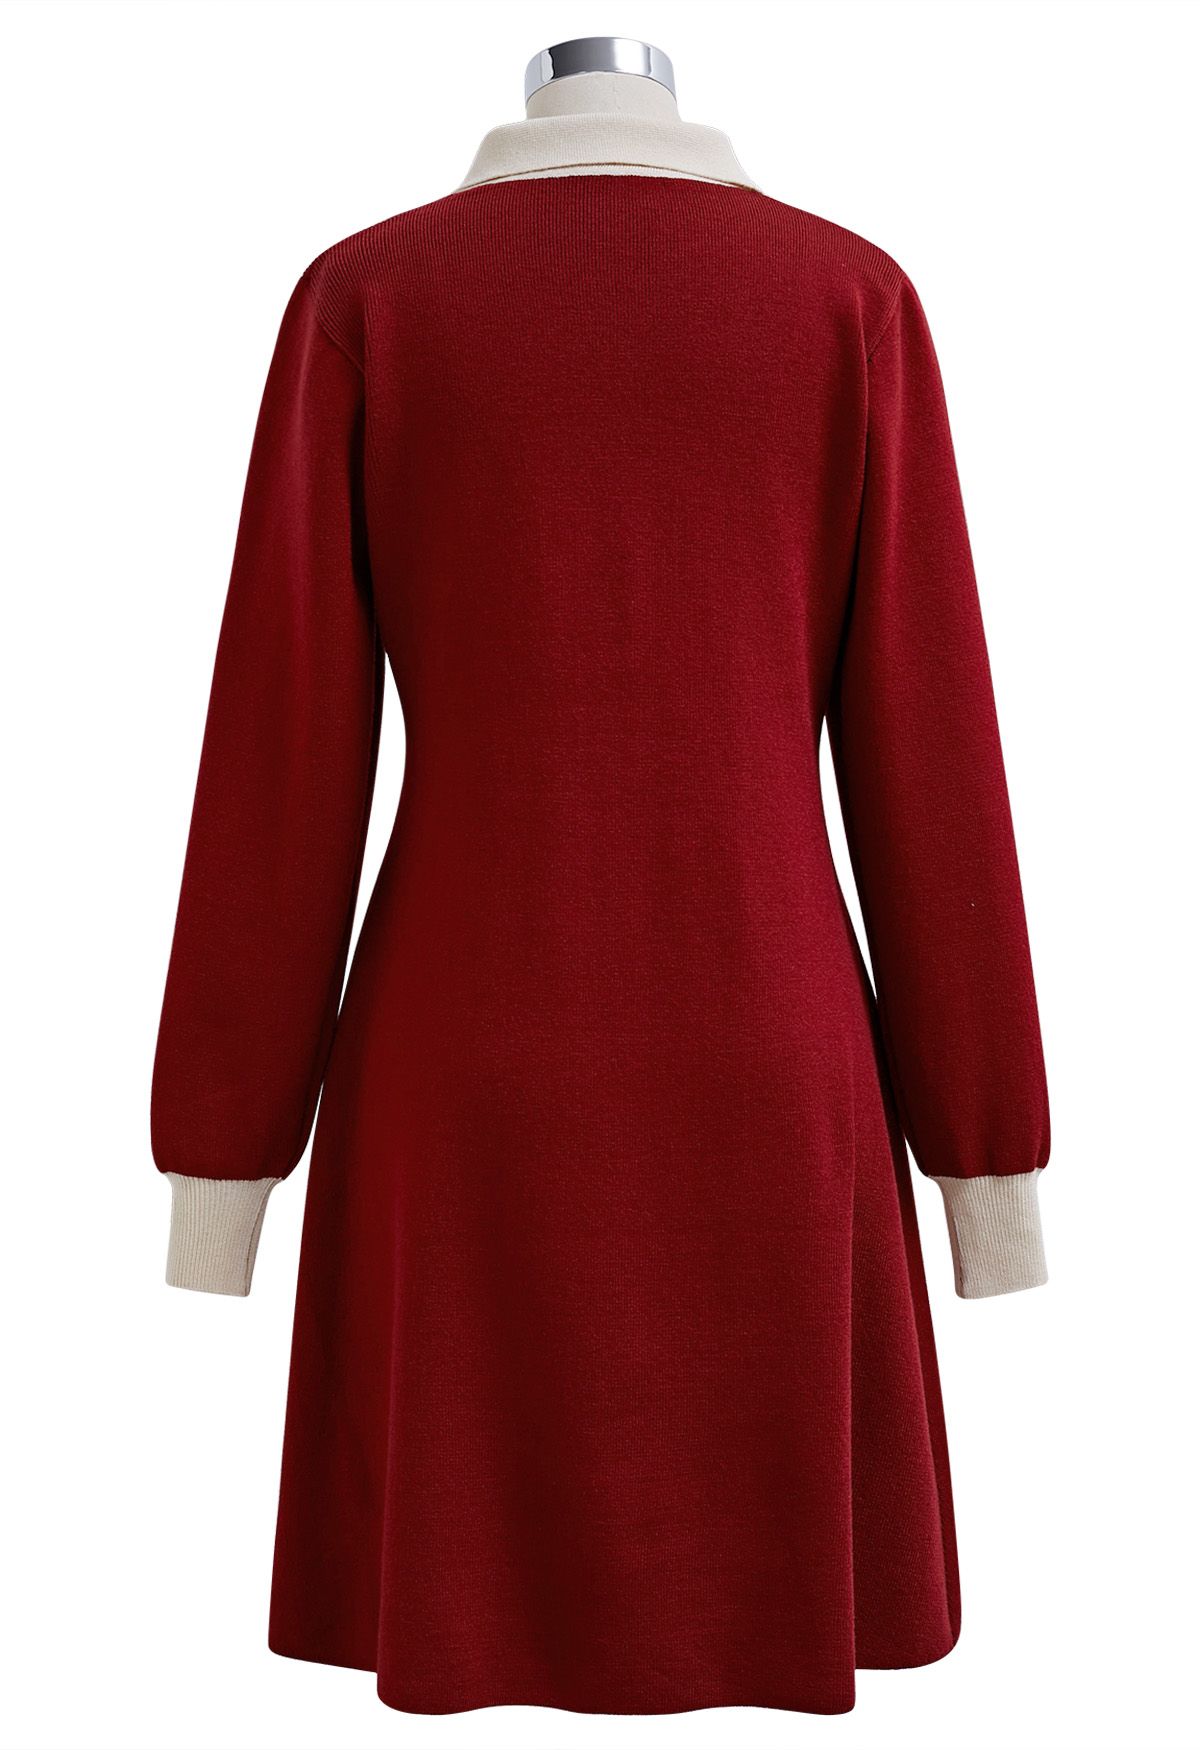 Contrast Edge Polo Knit Dress in Red